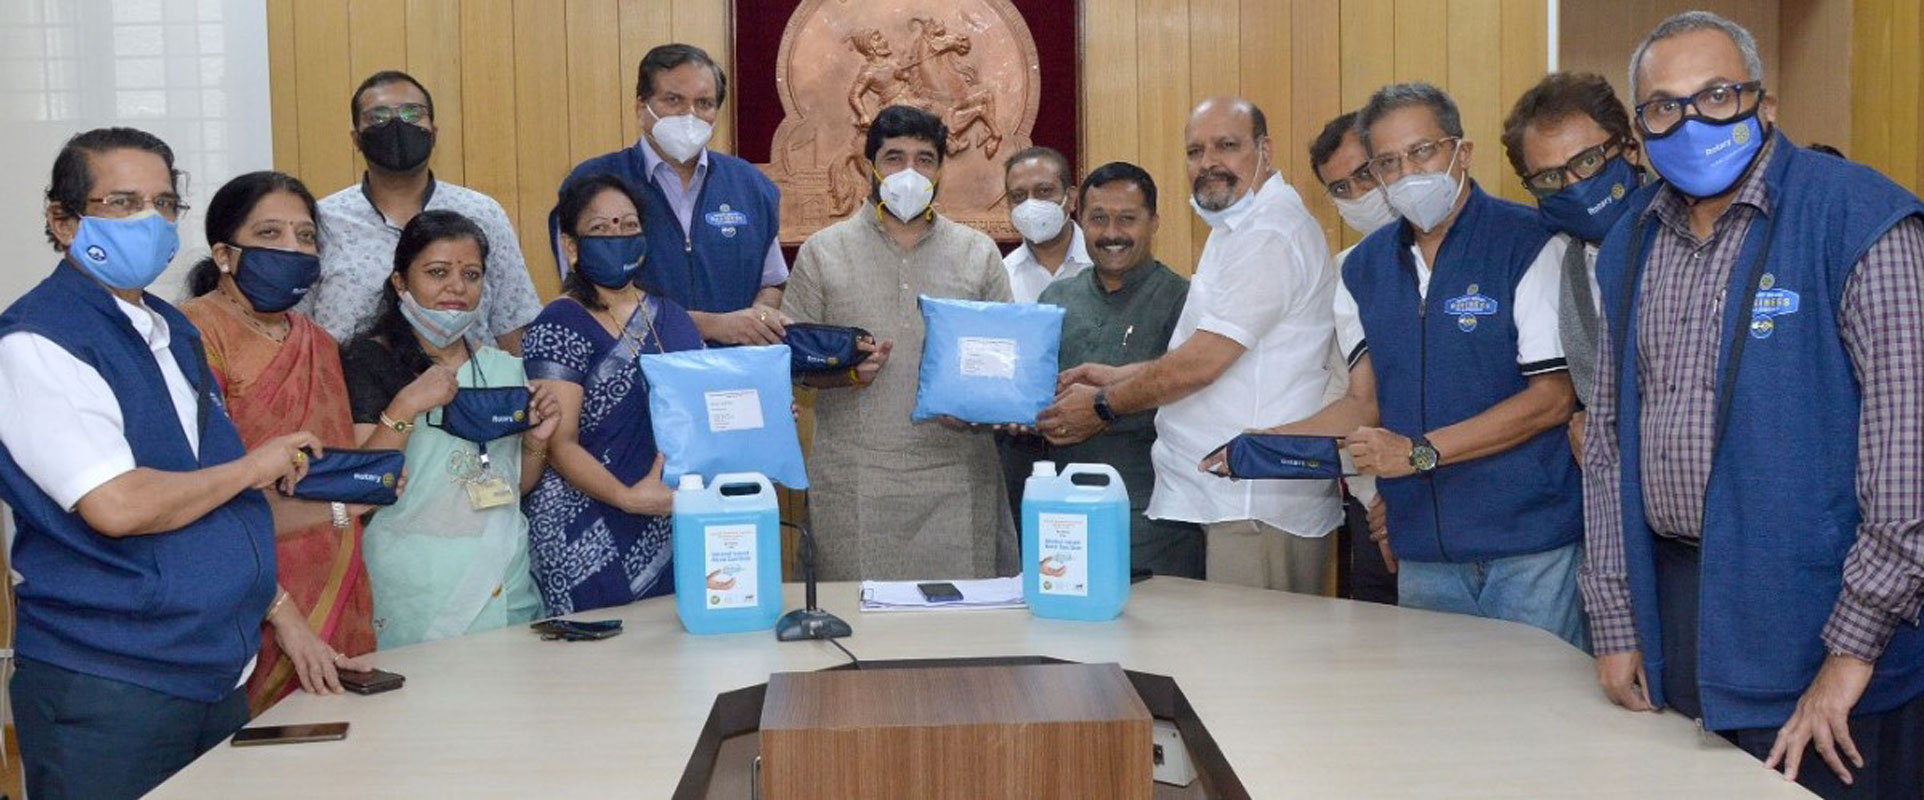 PDG Deepak ­Shikarpur (2nd from left, back row) donating Covid kits to Pune mayor Murlidhar Mohol, along with members of Pune clubs.